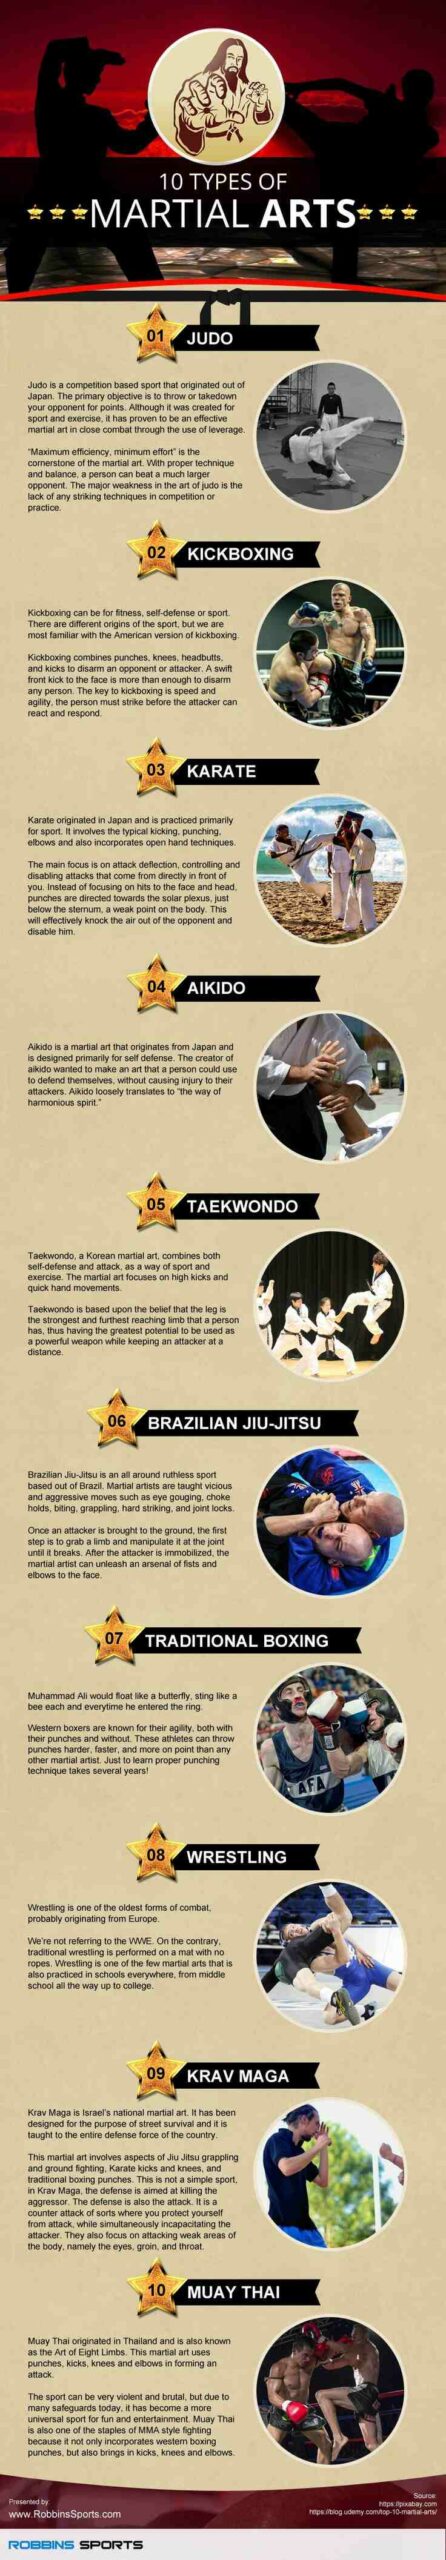 What is the 10 forms of martial arts?